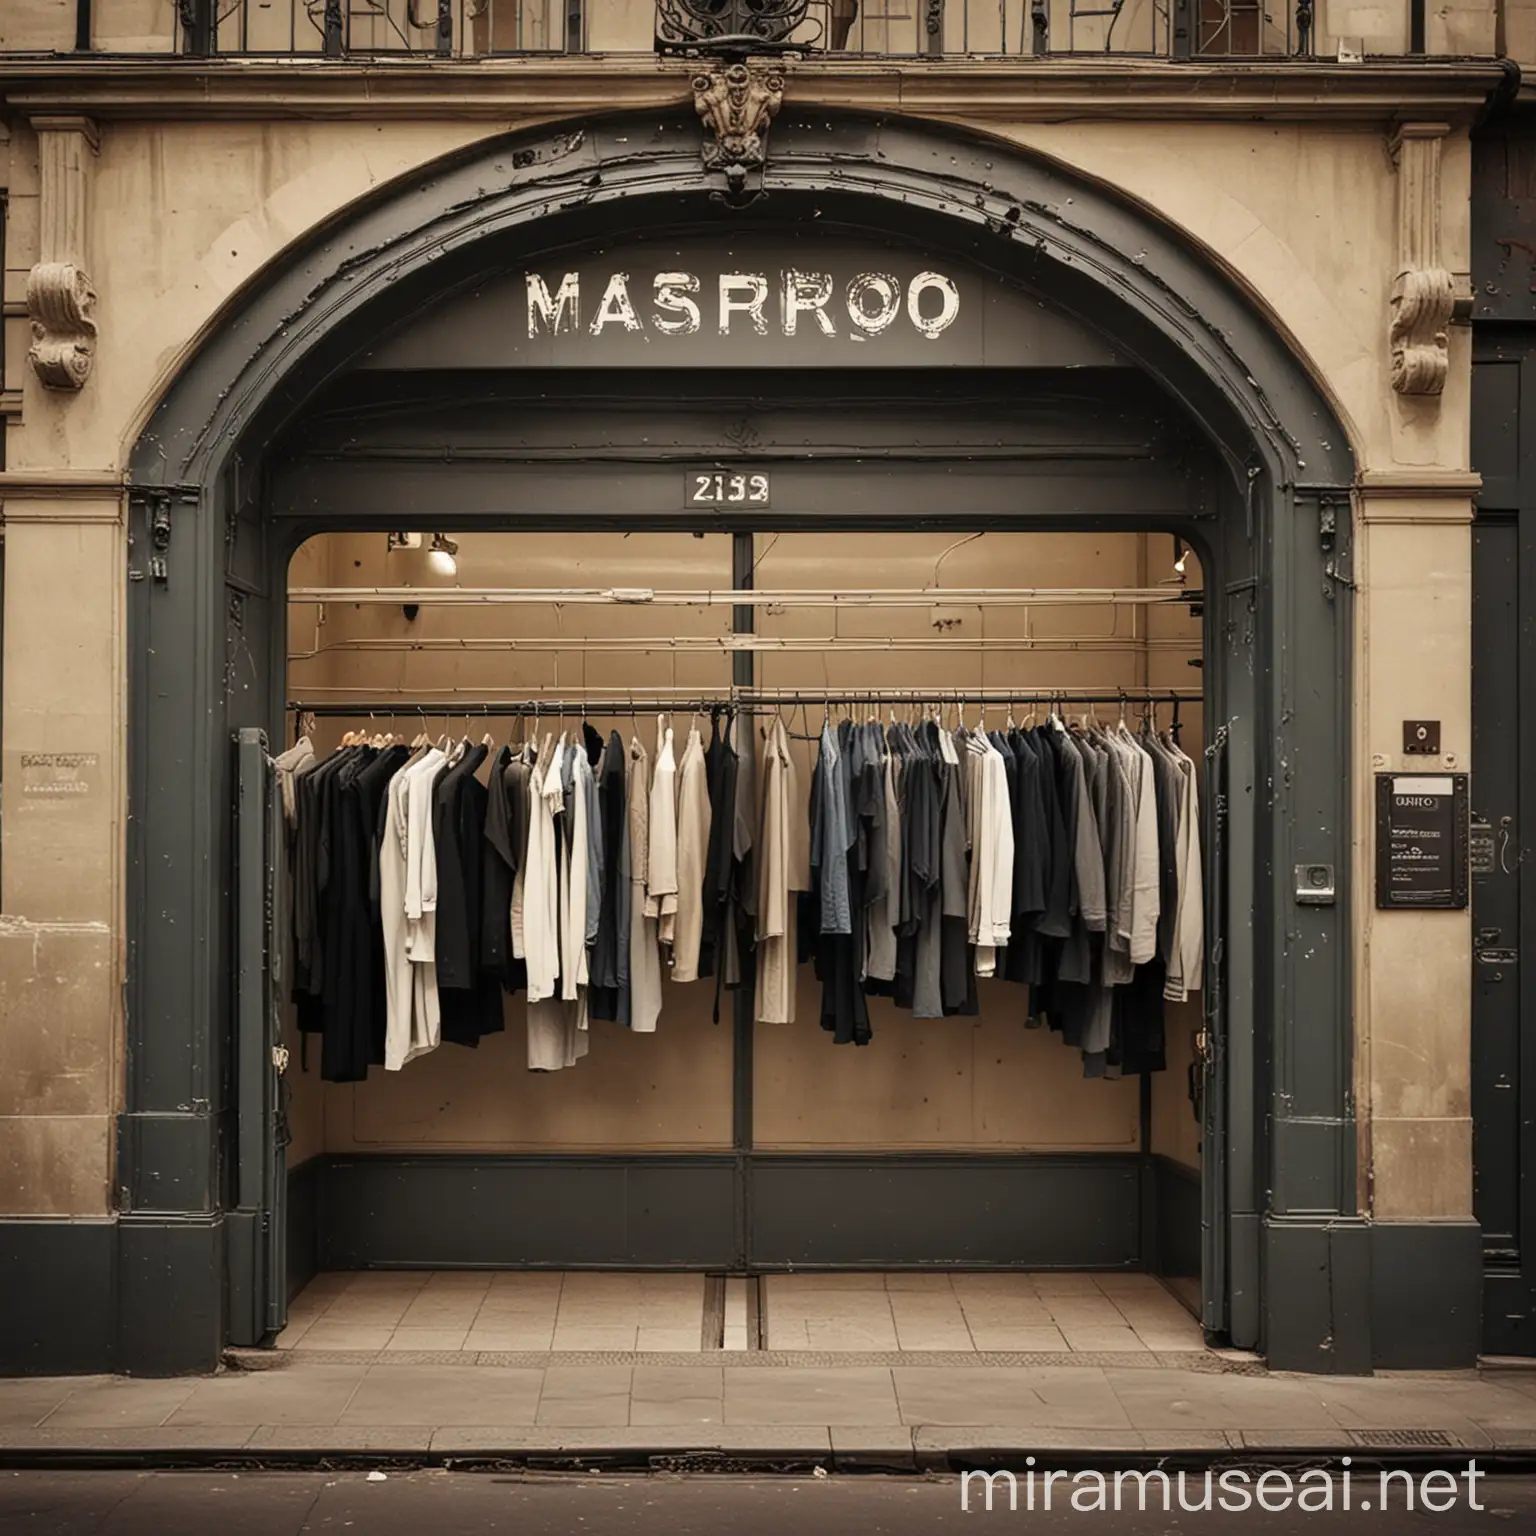 Parisian MetroInspired Clothing Store Entrance with WallHung Apparel